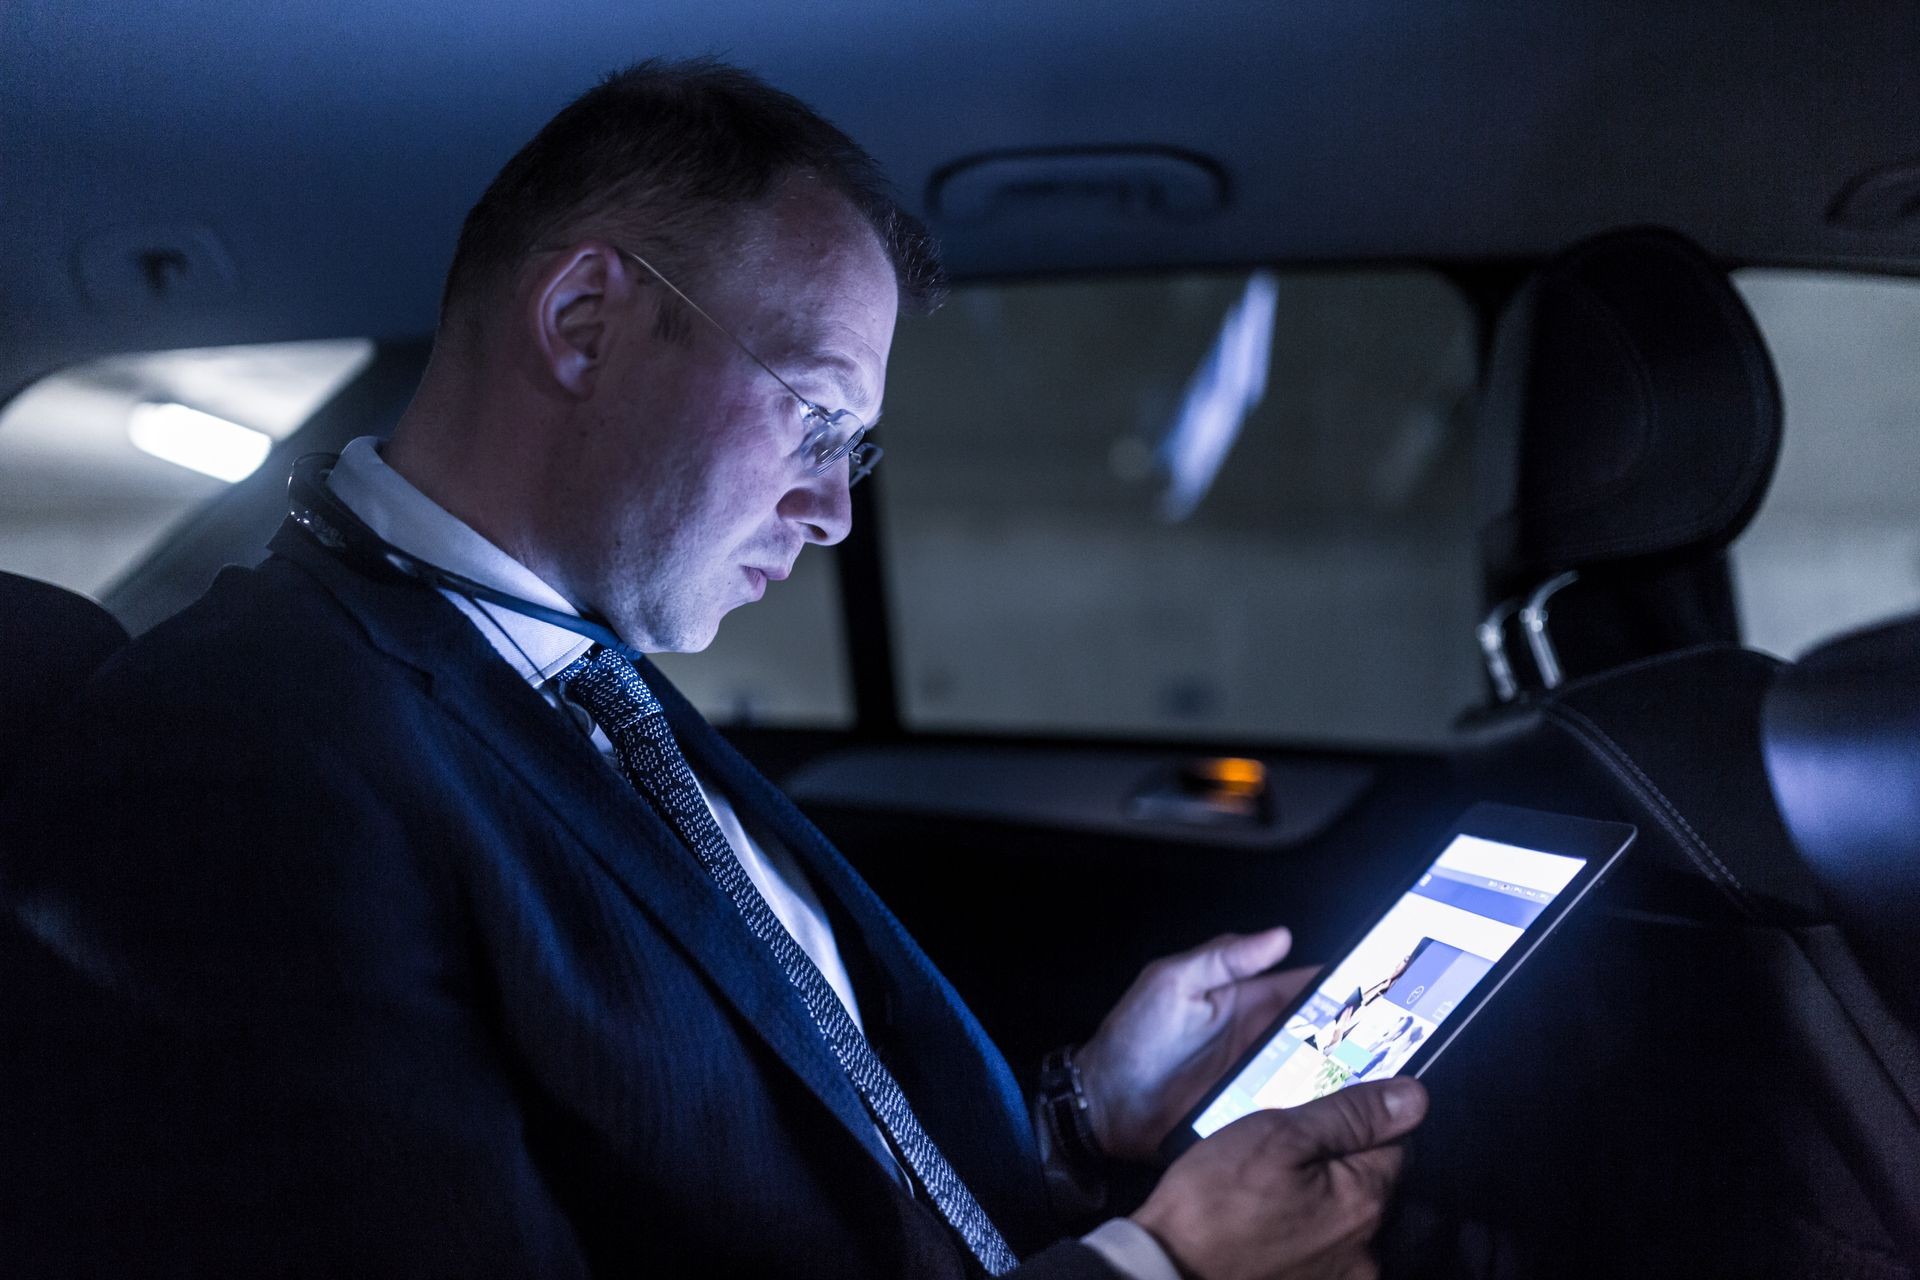 Businessman working remotely on business trip, using digital tablet, sitting in the back seat of taxi car.